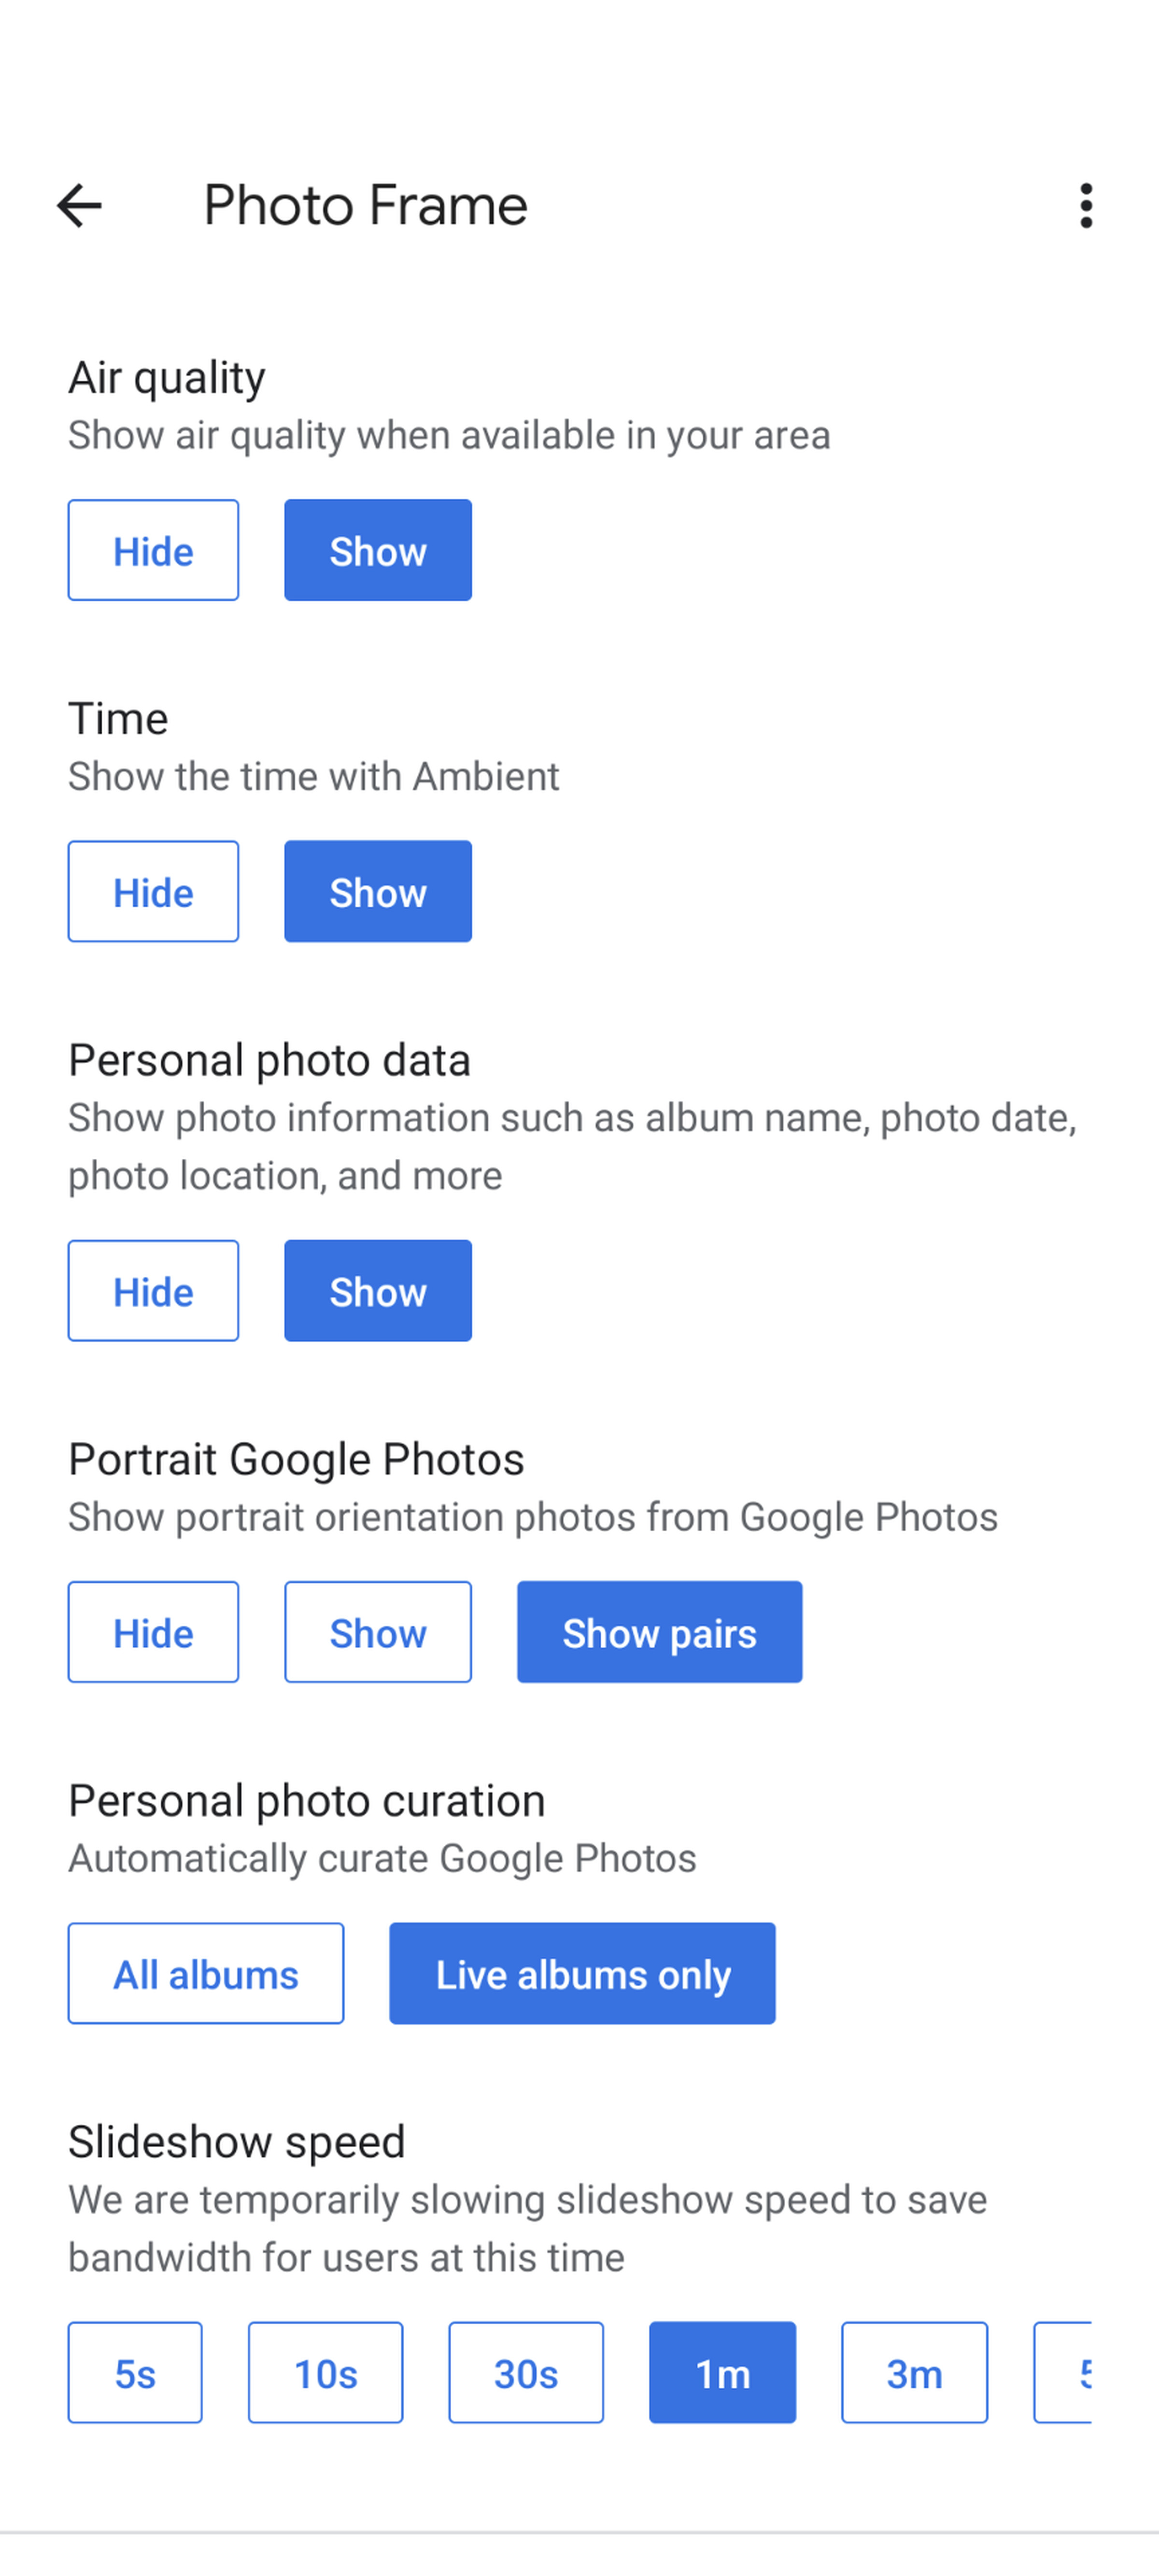 The Google Home app provides settings for controlling your photo album slideshow.